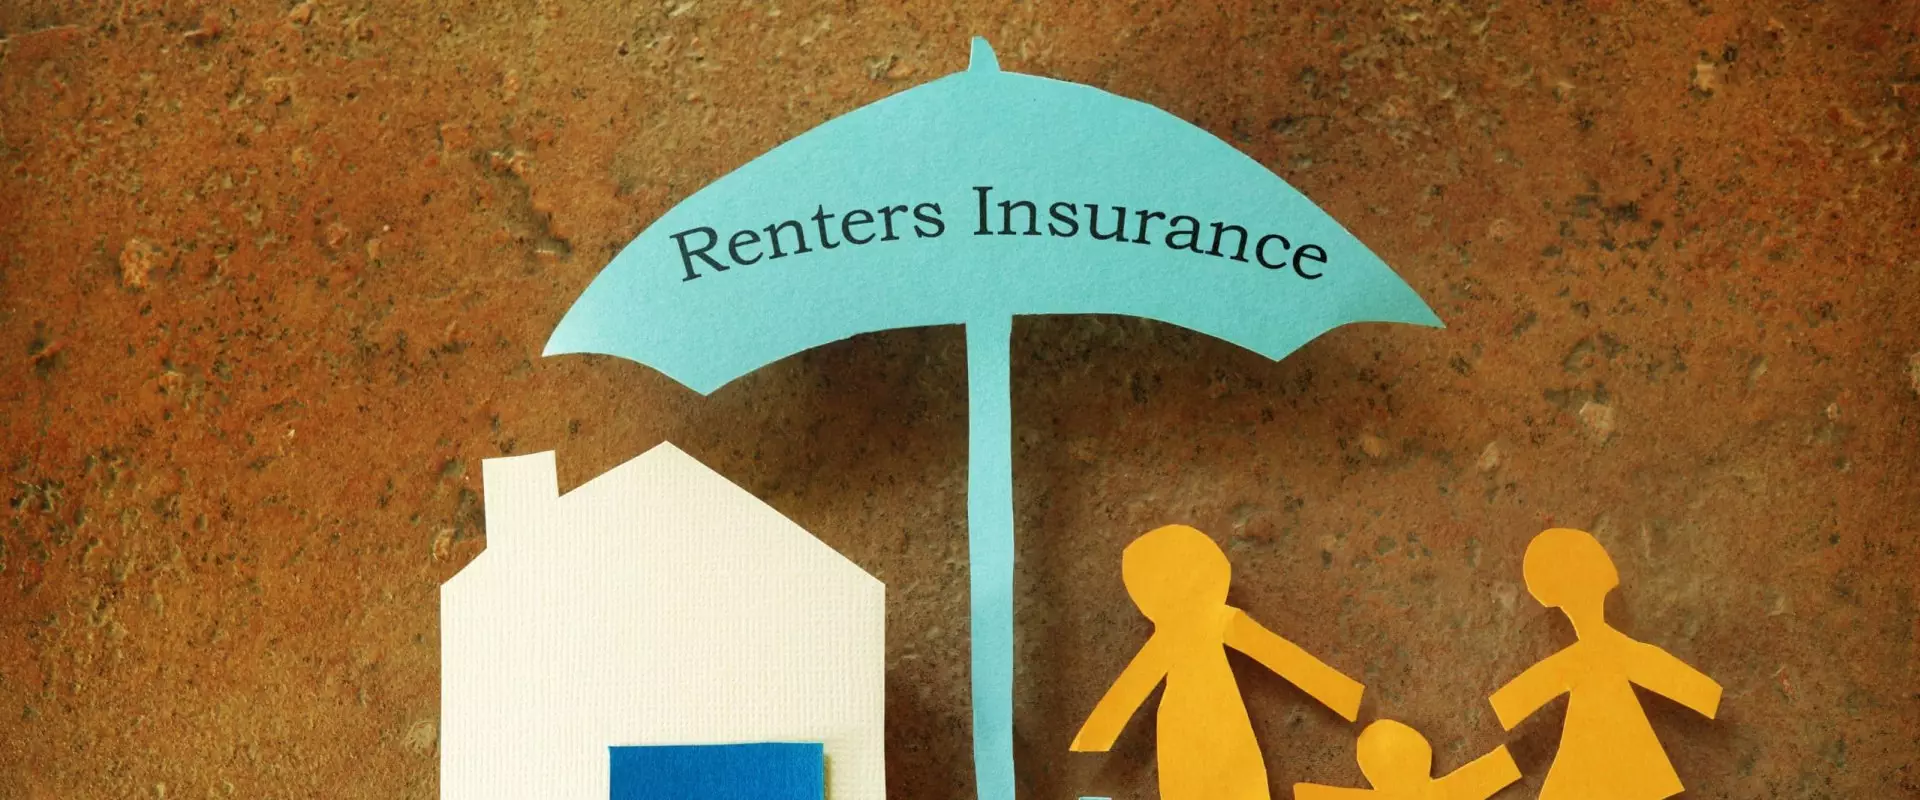 Is renter’s insurance expensive?